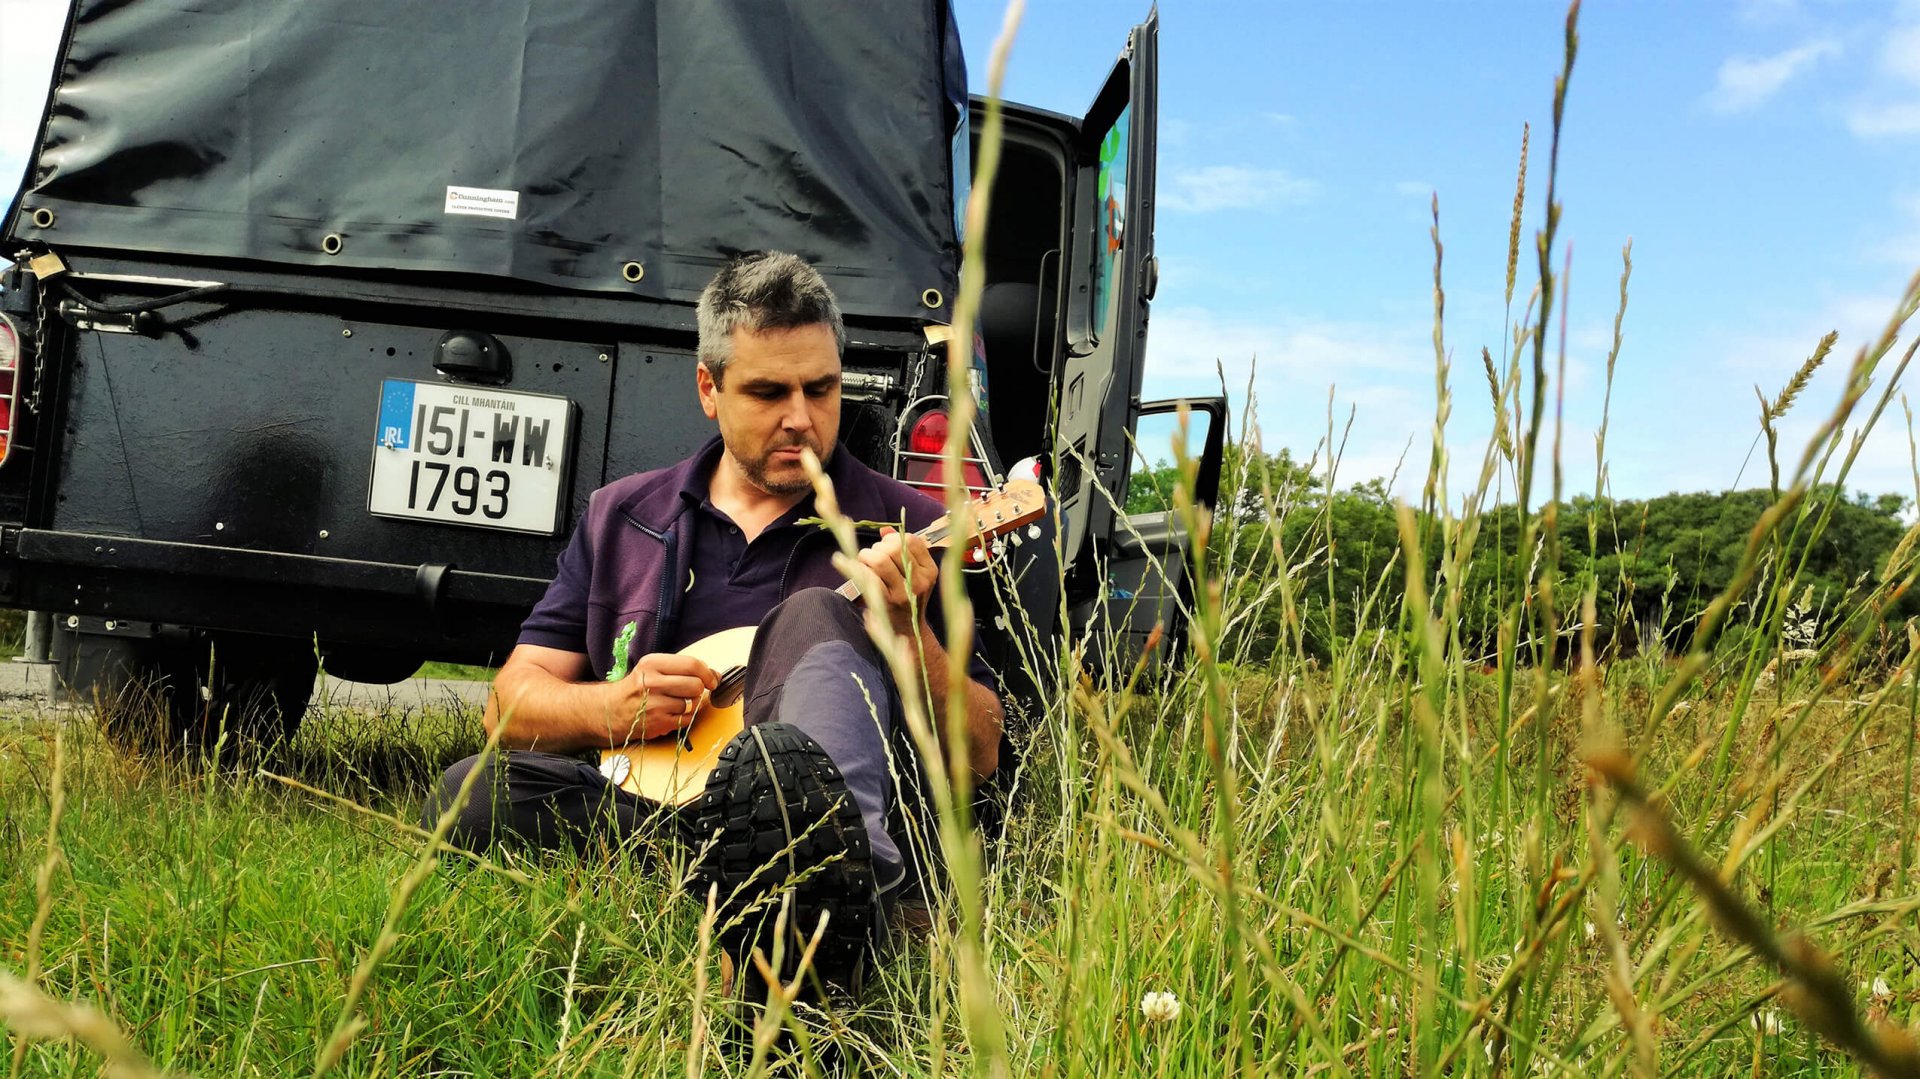 VagaGuide Tour Guide Tim playing his mandolin on tour beside his Vagabond tour vehicle in Ireland